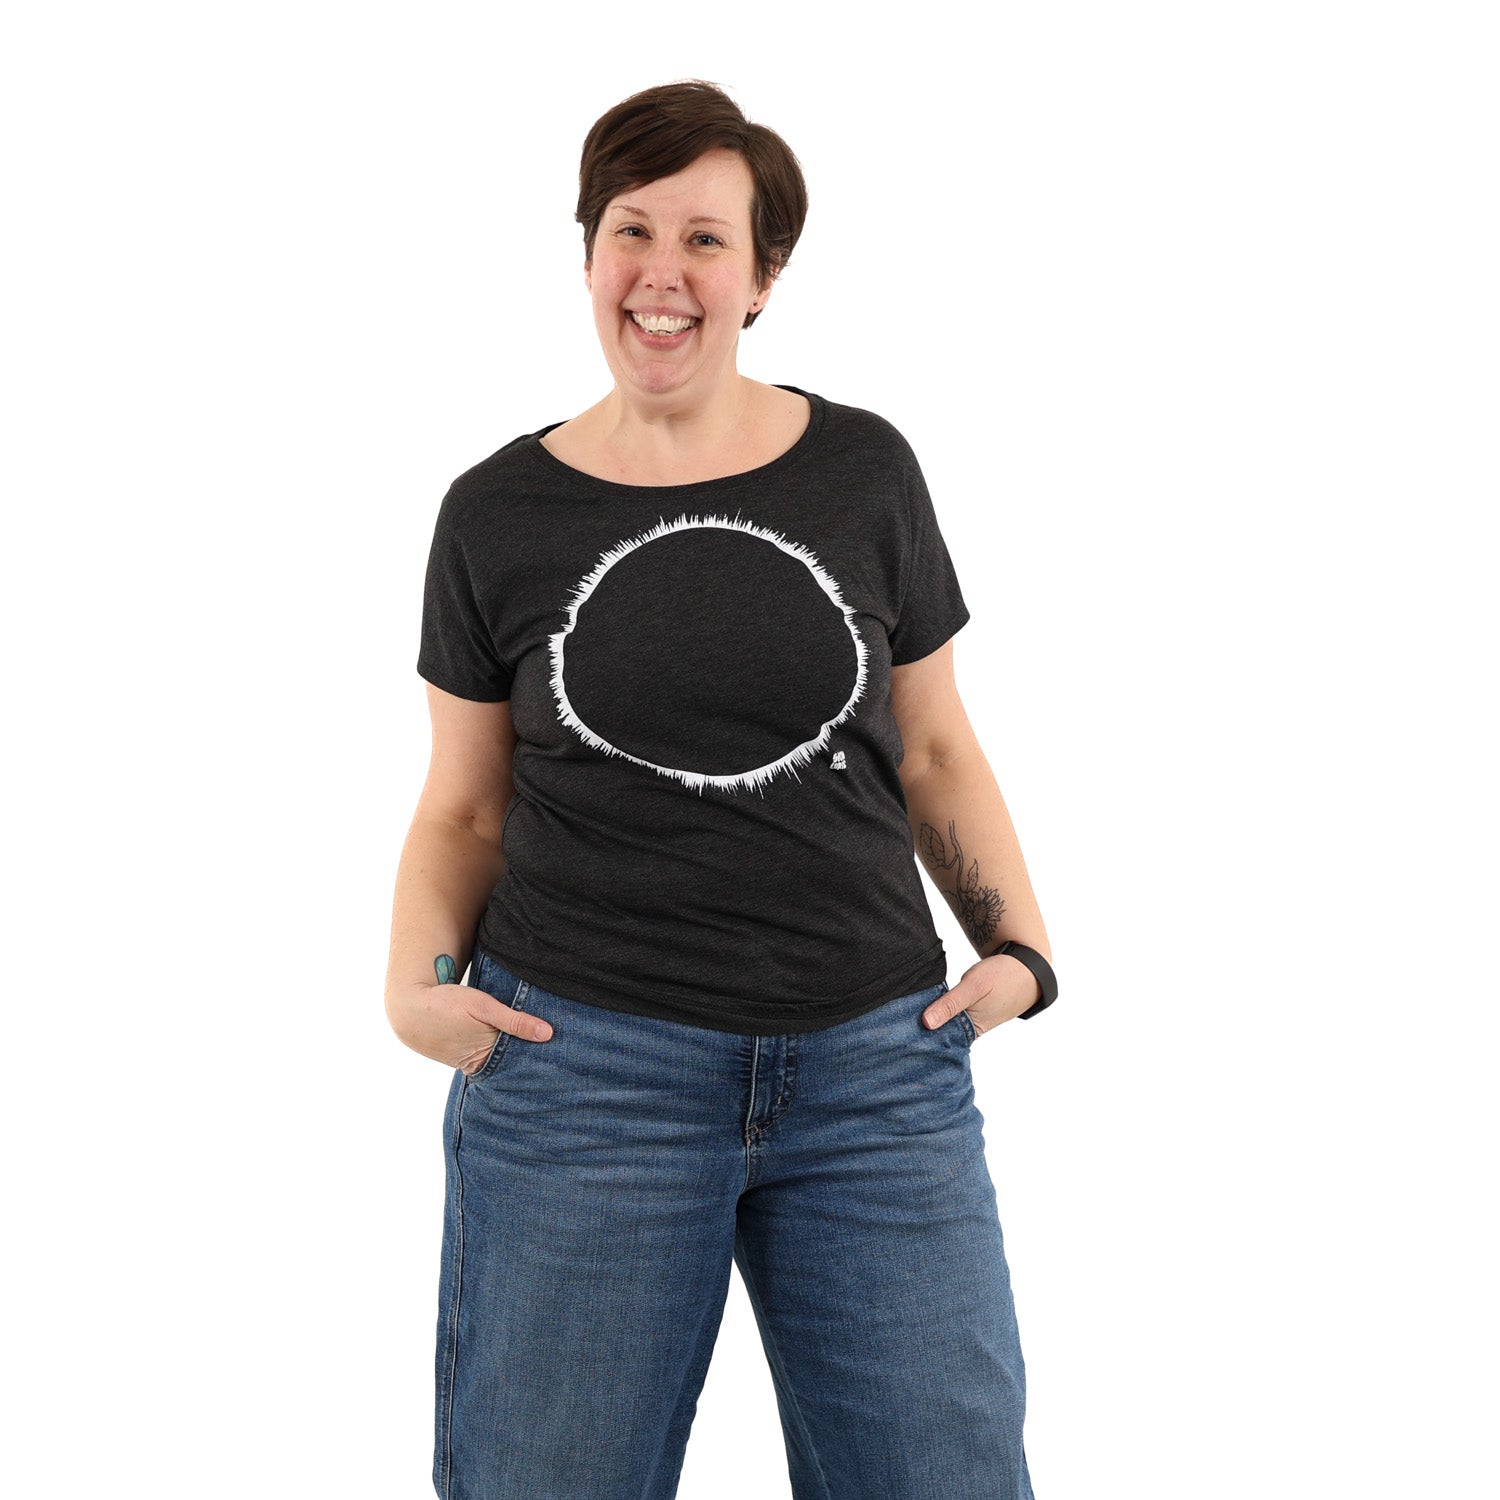 Woman smiling big wearing a black t-shirt with white ink of an eclipse.